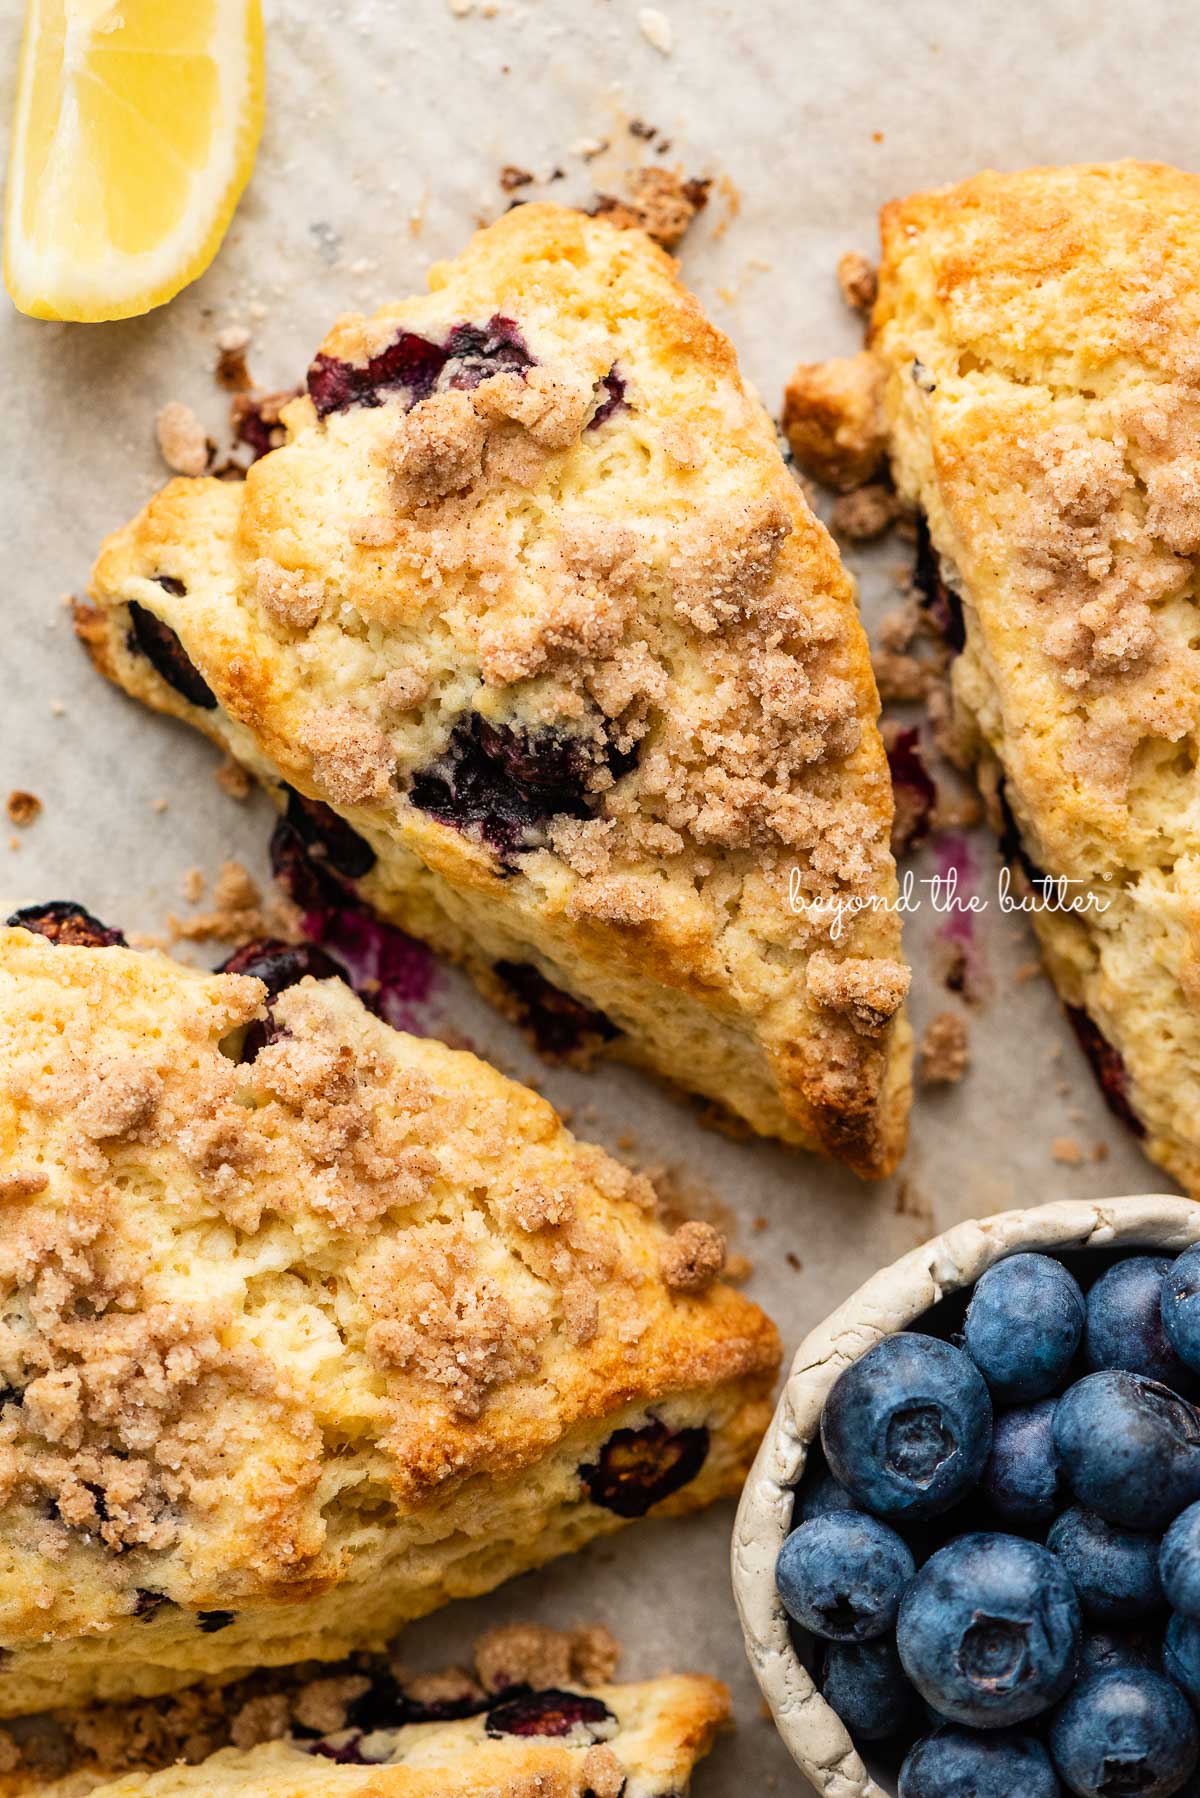 Just baked lemon blueberry streusel scones on a parchment lined baking sheet | © Beyond the Butter®